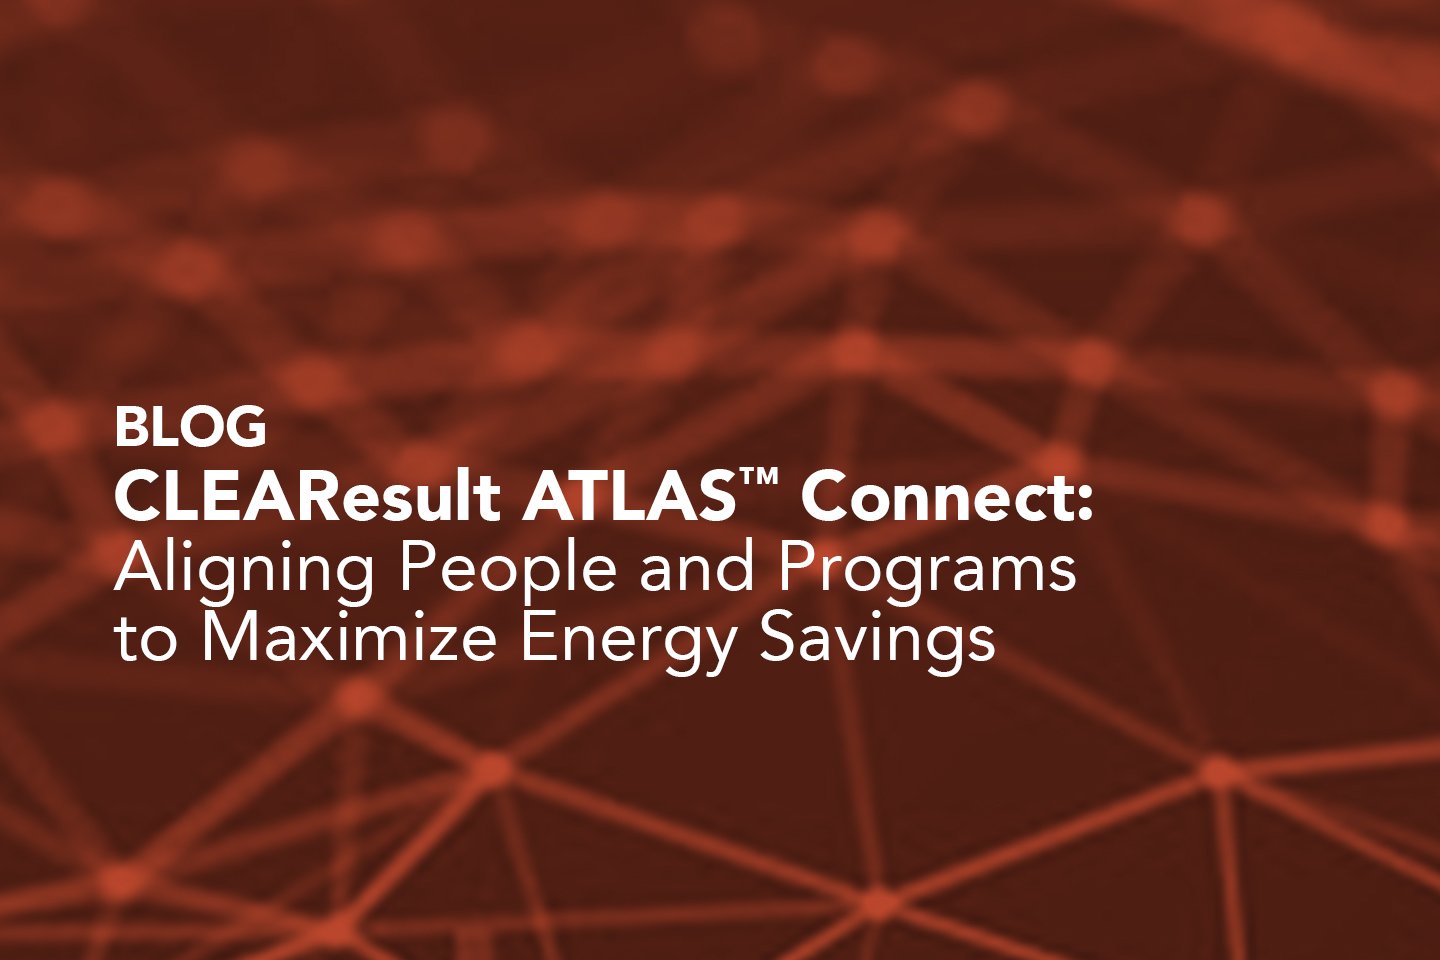 clearesult-atlas-connect-aligning-people-programs-to-maximize